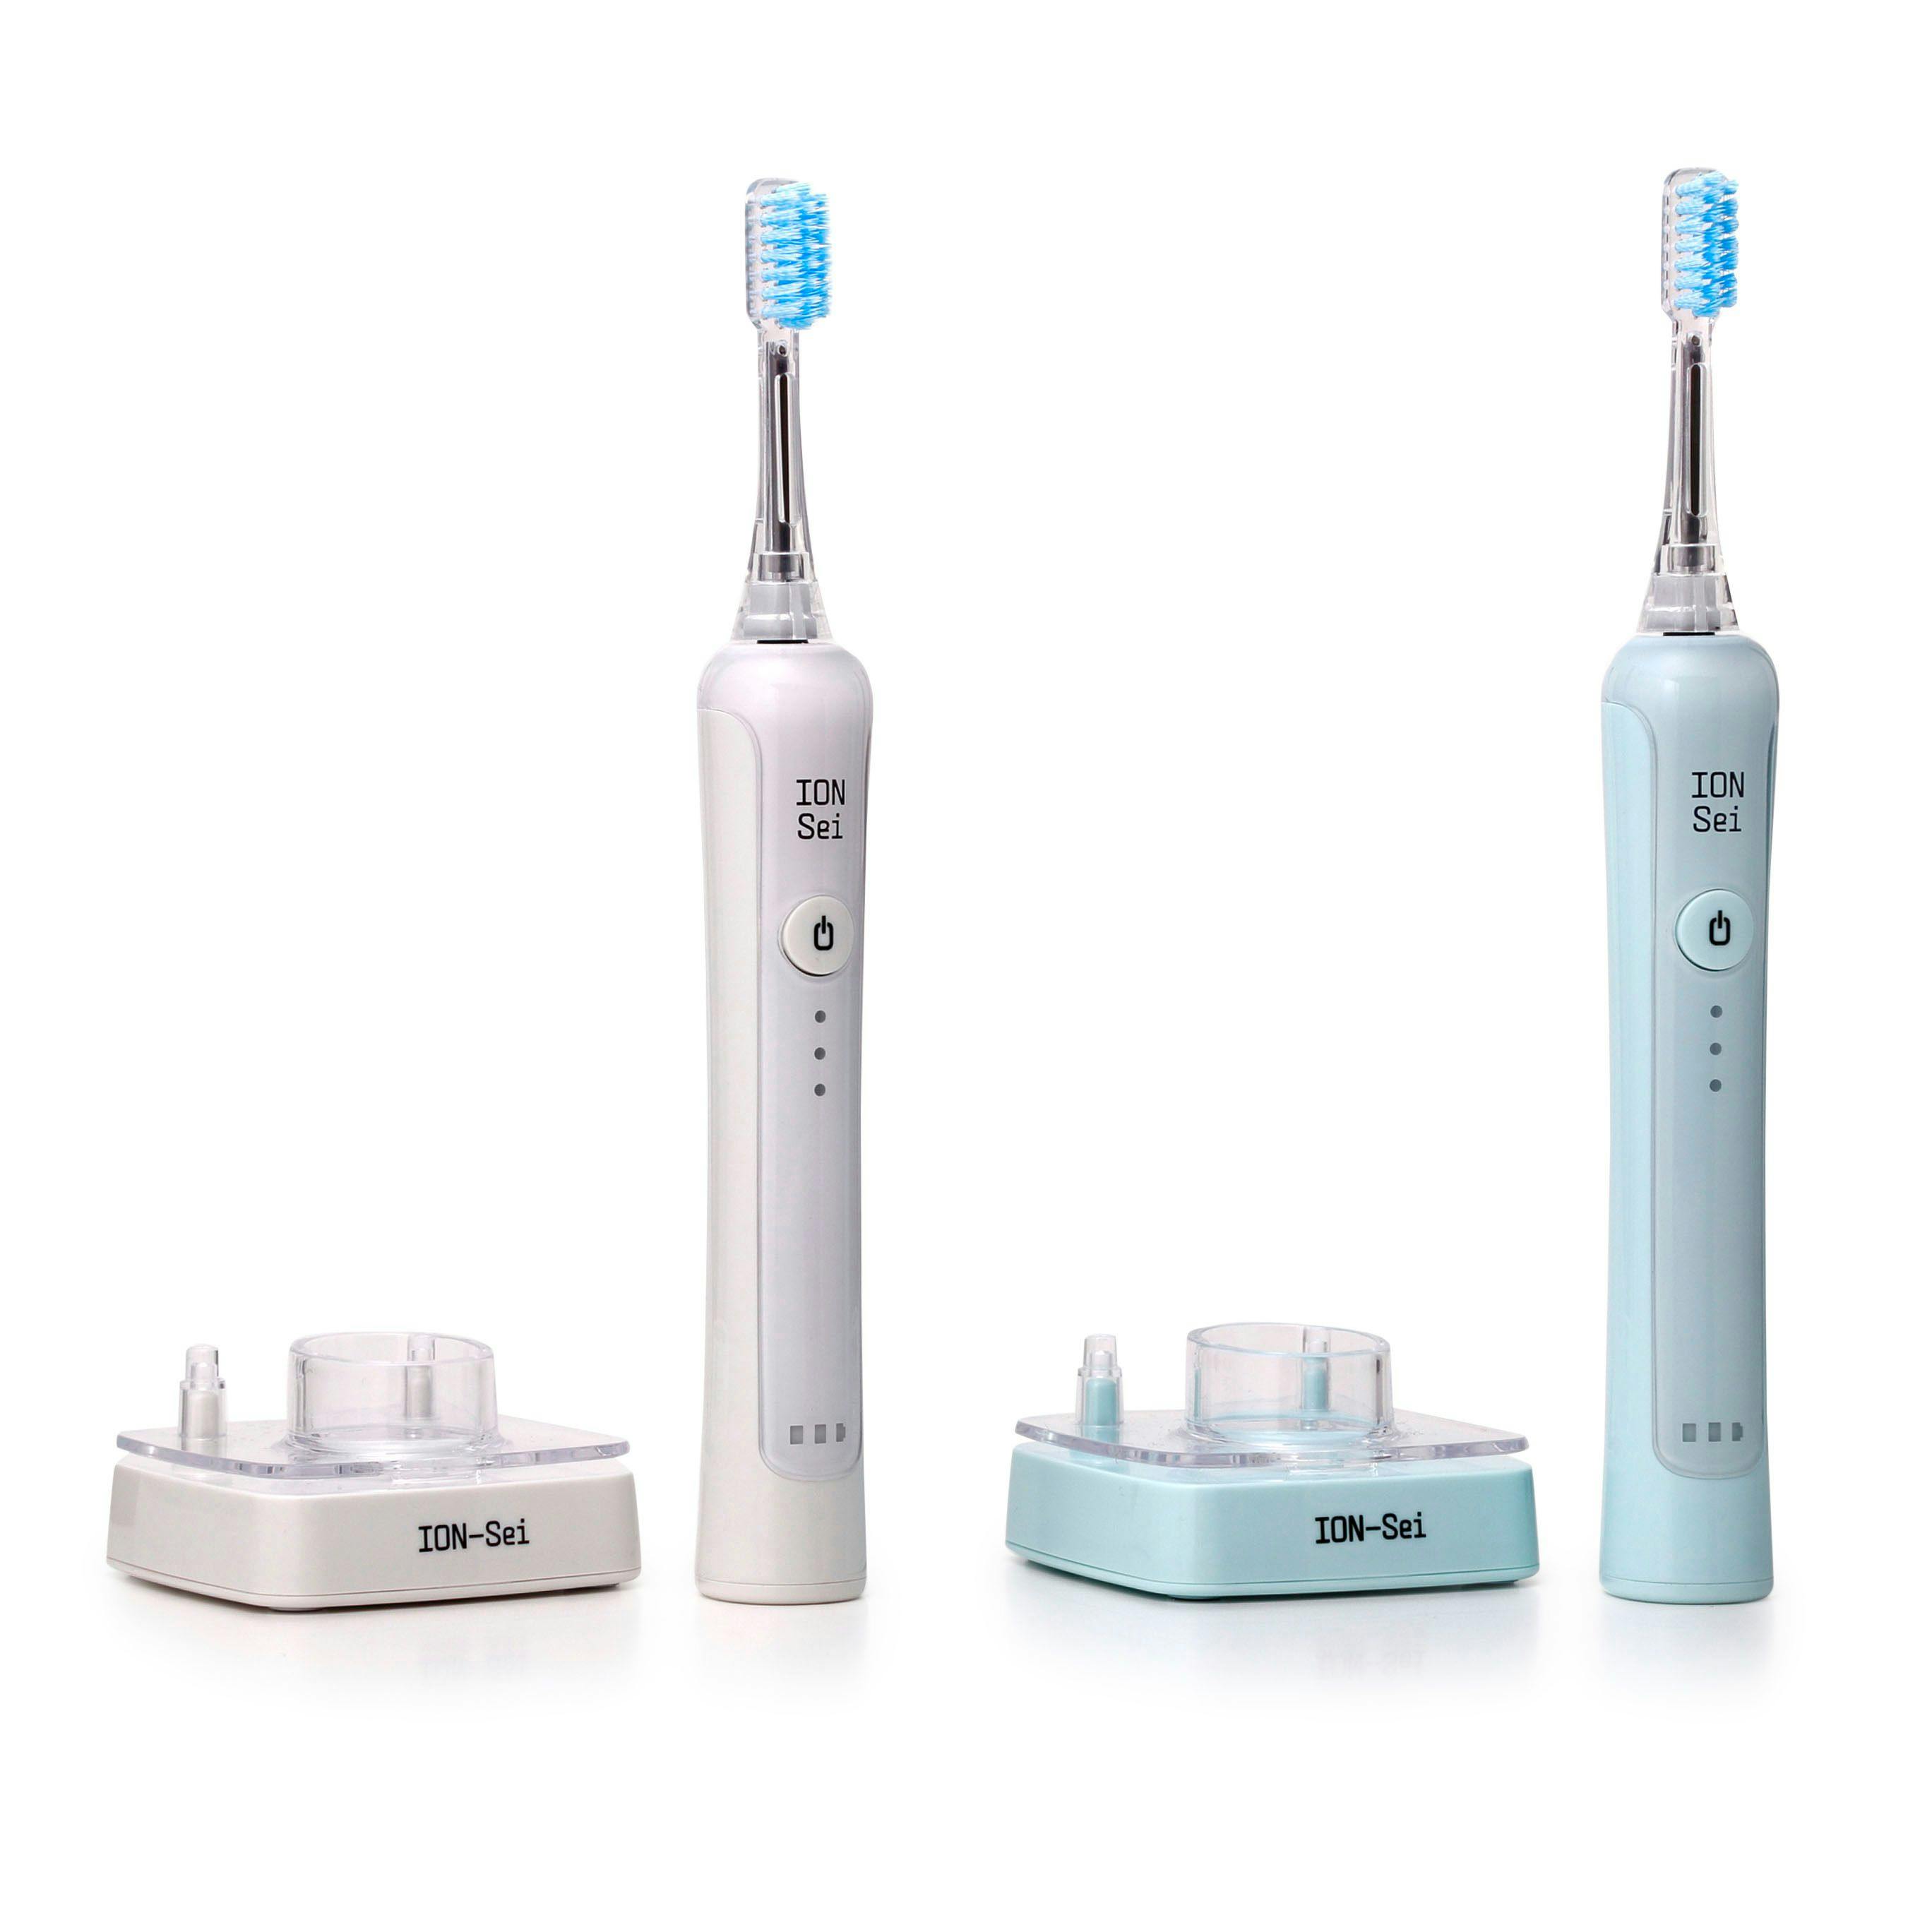 New ionic toothbrush released in US market